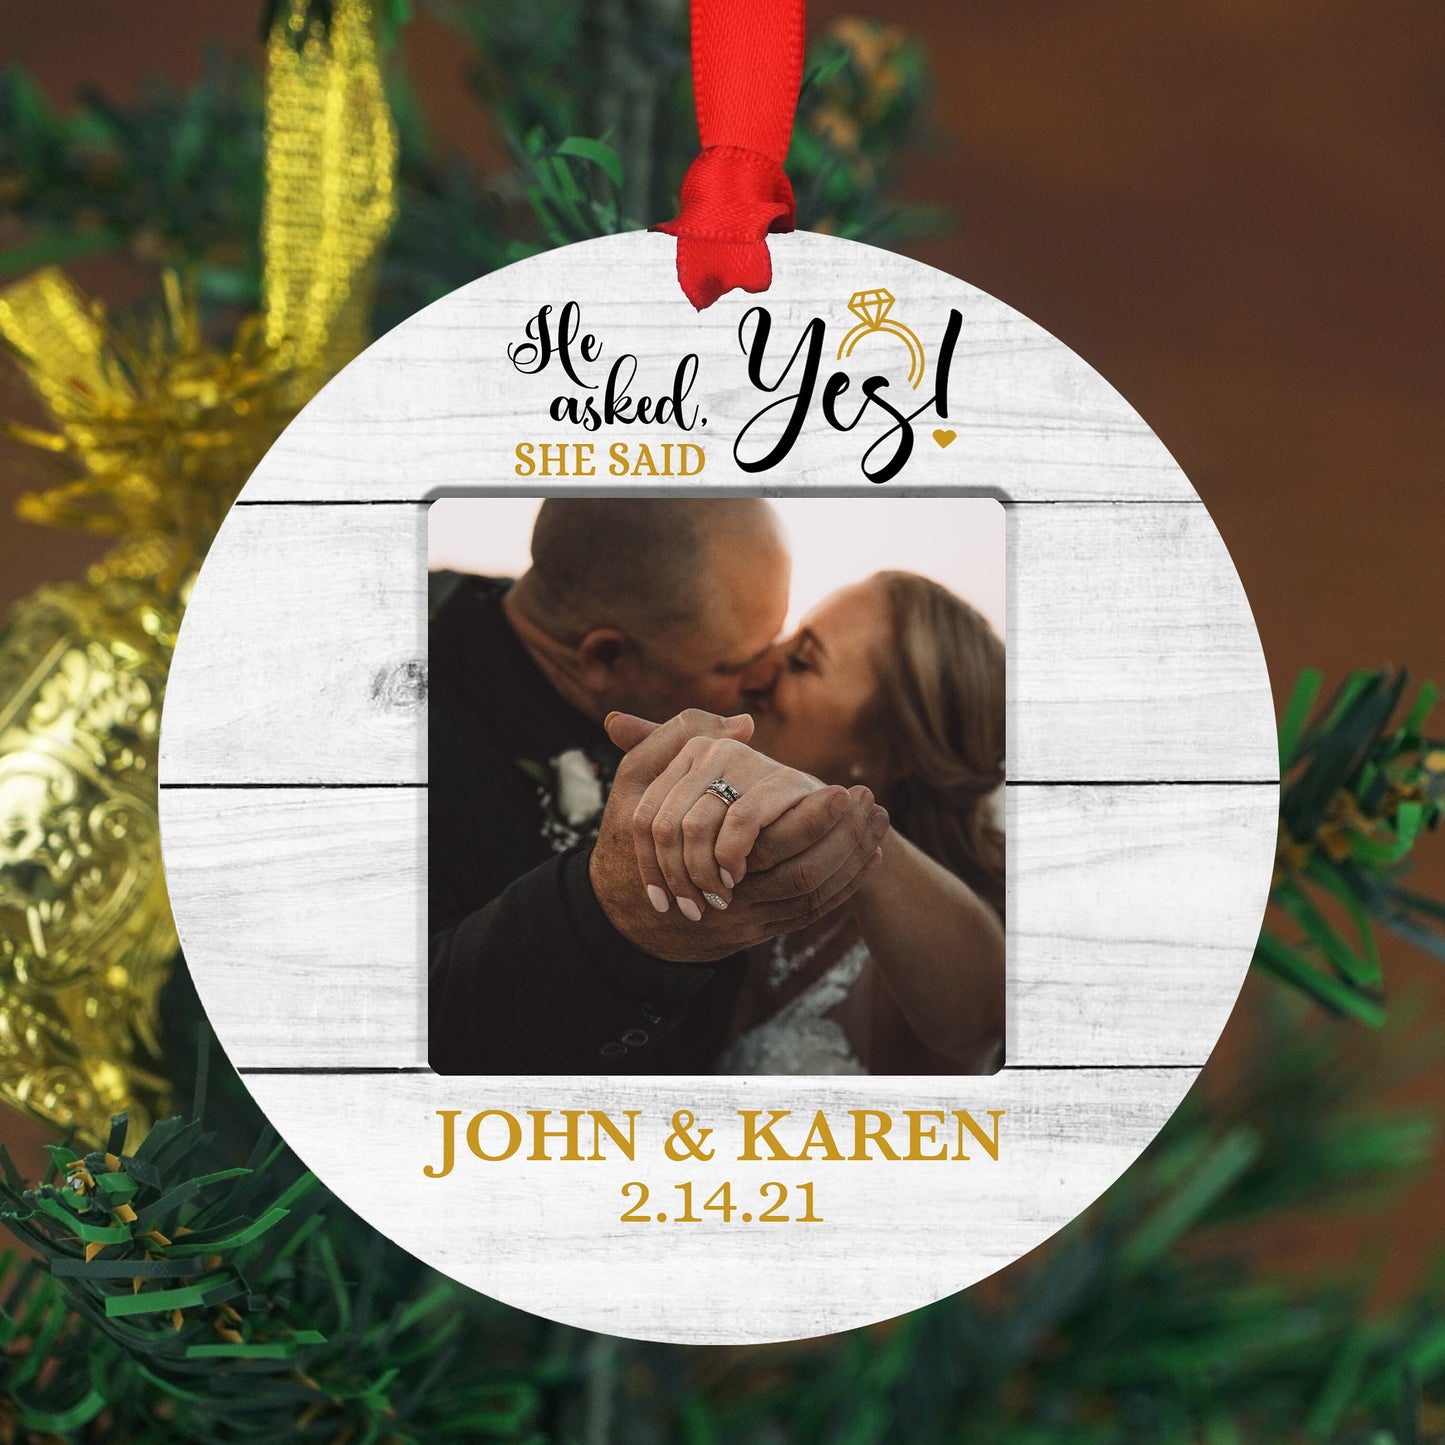 Personalized Engaged Ornament - Custom Photo Ornament - 4" or 6" - Christmas Ornament - Couple Wedding Gift - He Asked, He Said Yes!